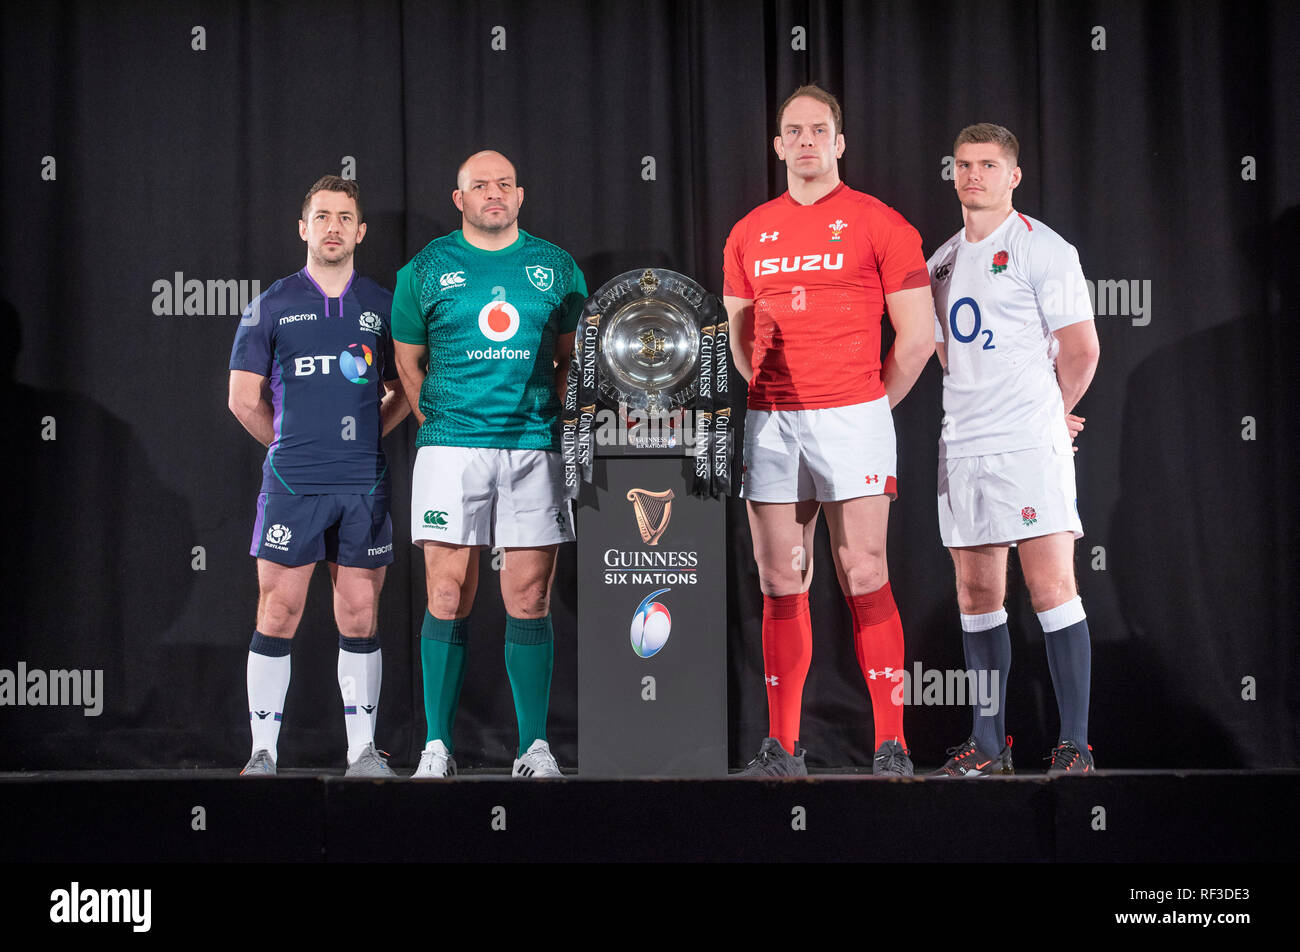 Swansea, UK. 23rd Jan, 2019. Guinness Six Nations Rugby Tournament launch  at the Hurlingham Club in London - 23rd January 2019 Six Nations rugby  captains (L-R) Scotland's Greig Laidlaw, Ireland's Rory Best,